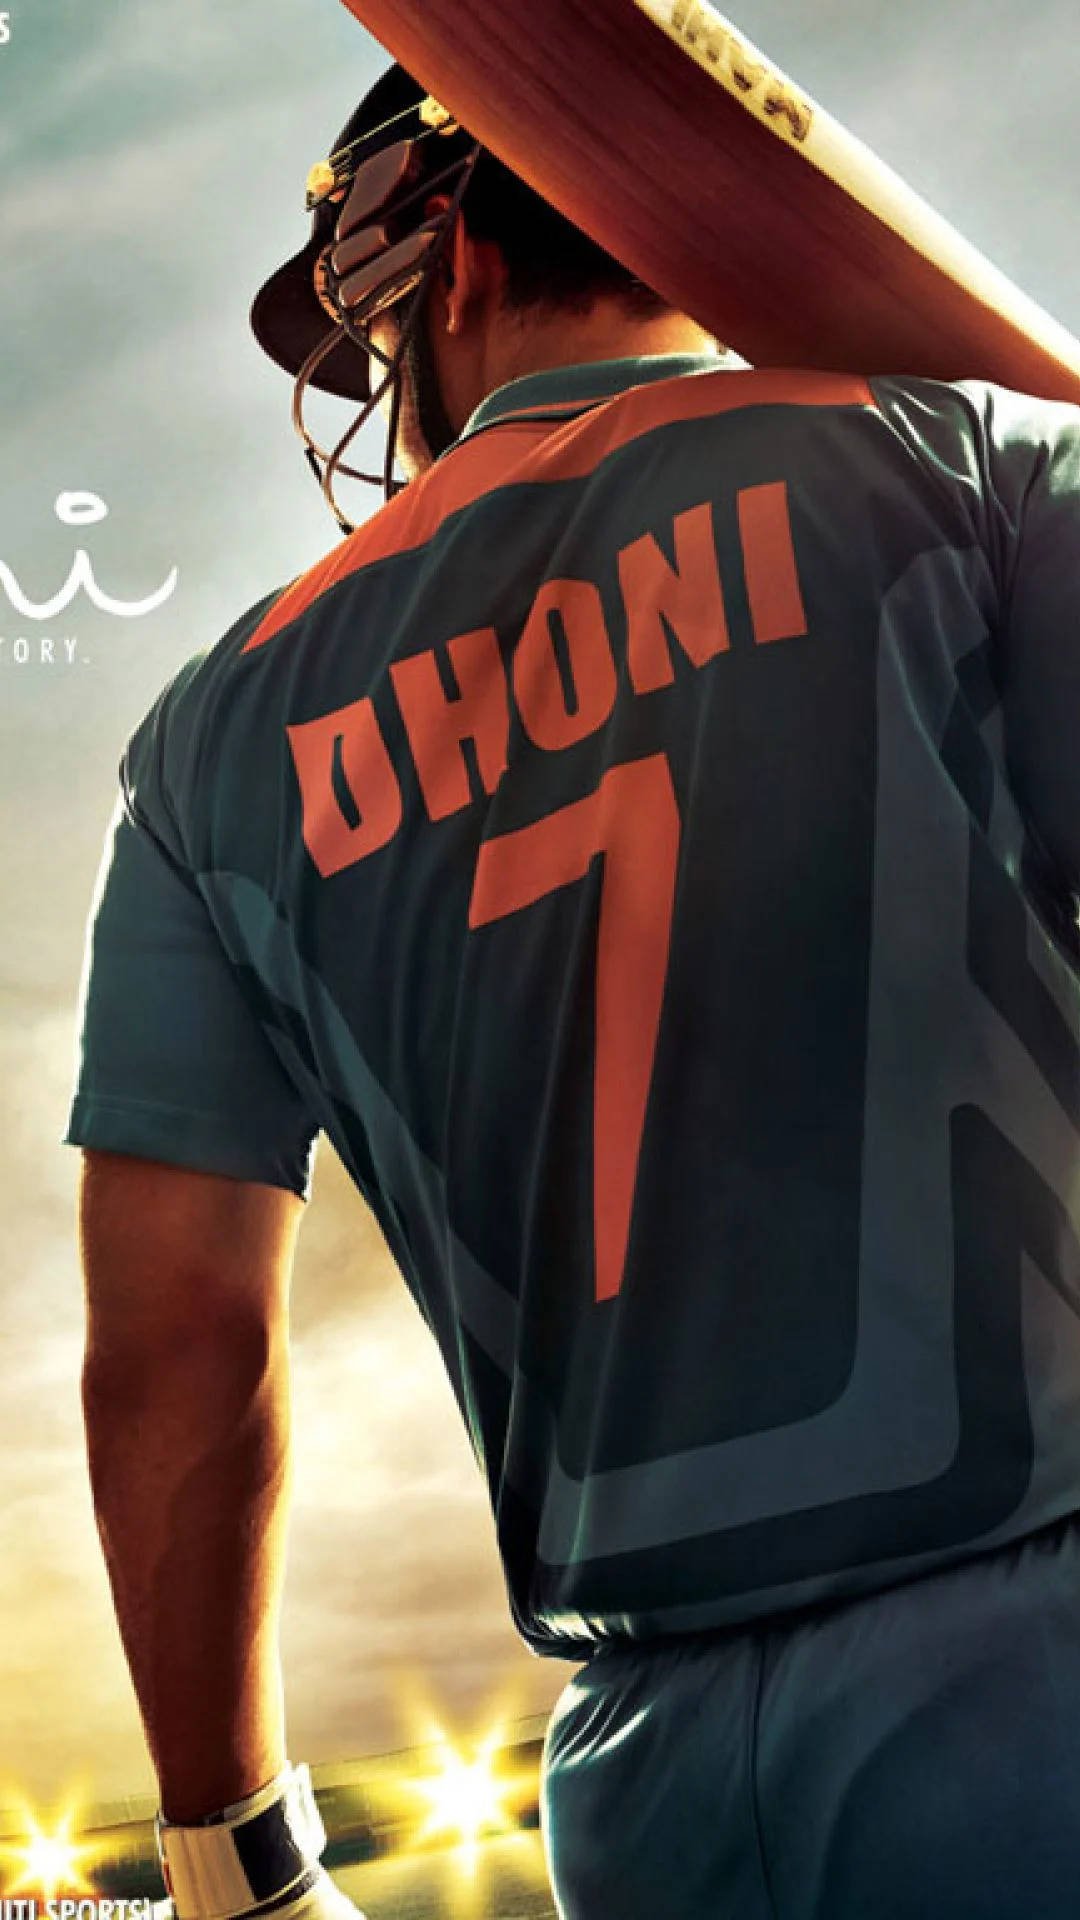 Ms Dhoni Movie Poster